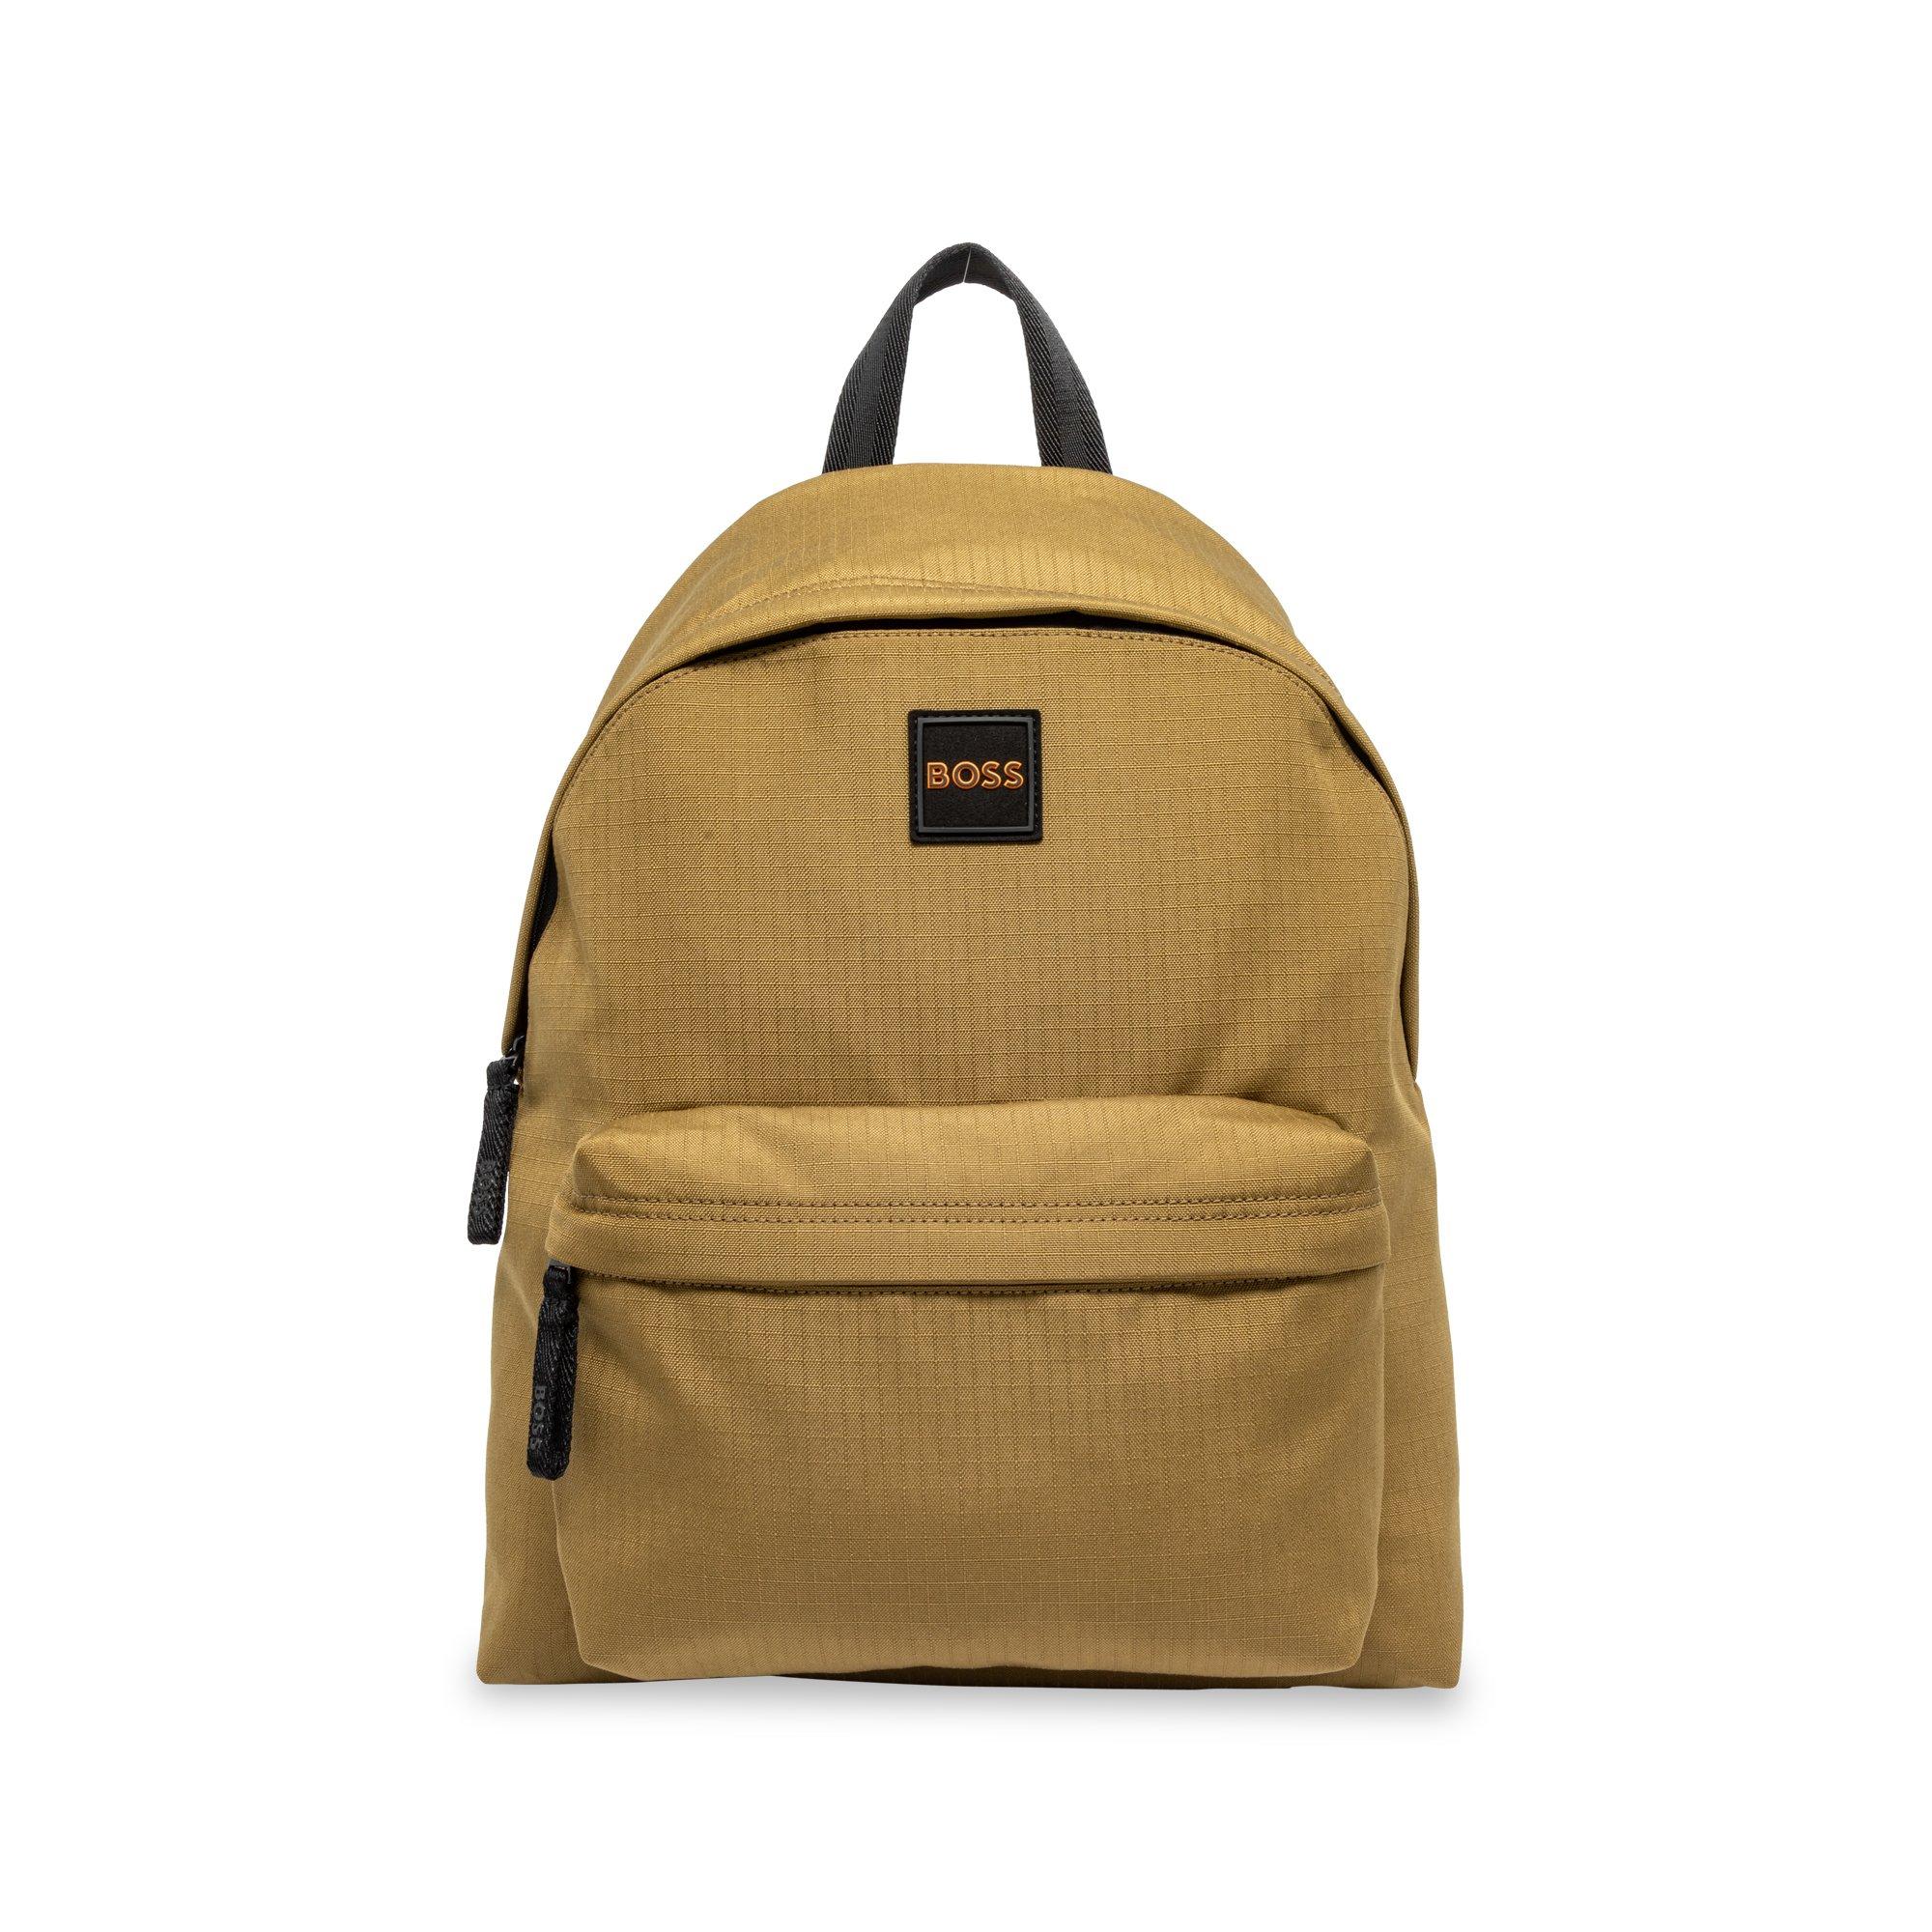 BOSS Colby Backpack Sac à dos 